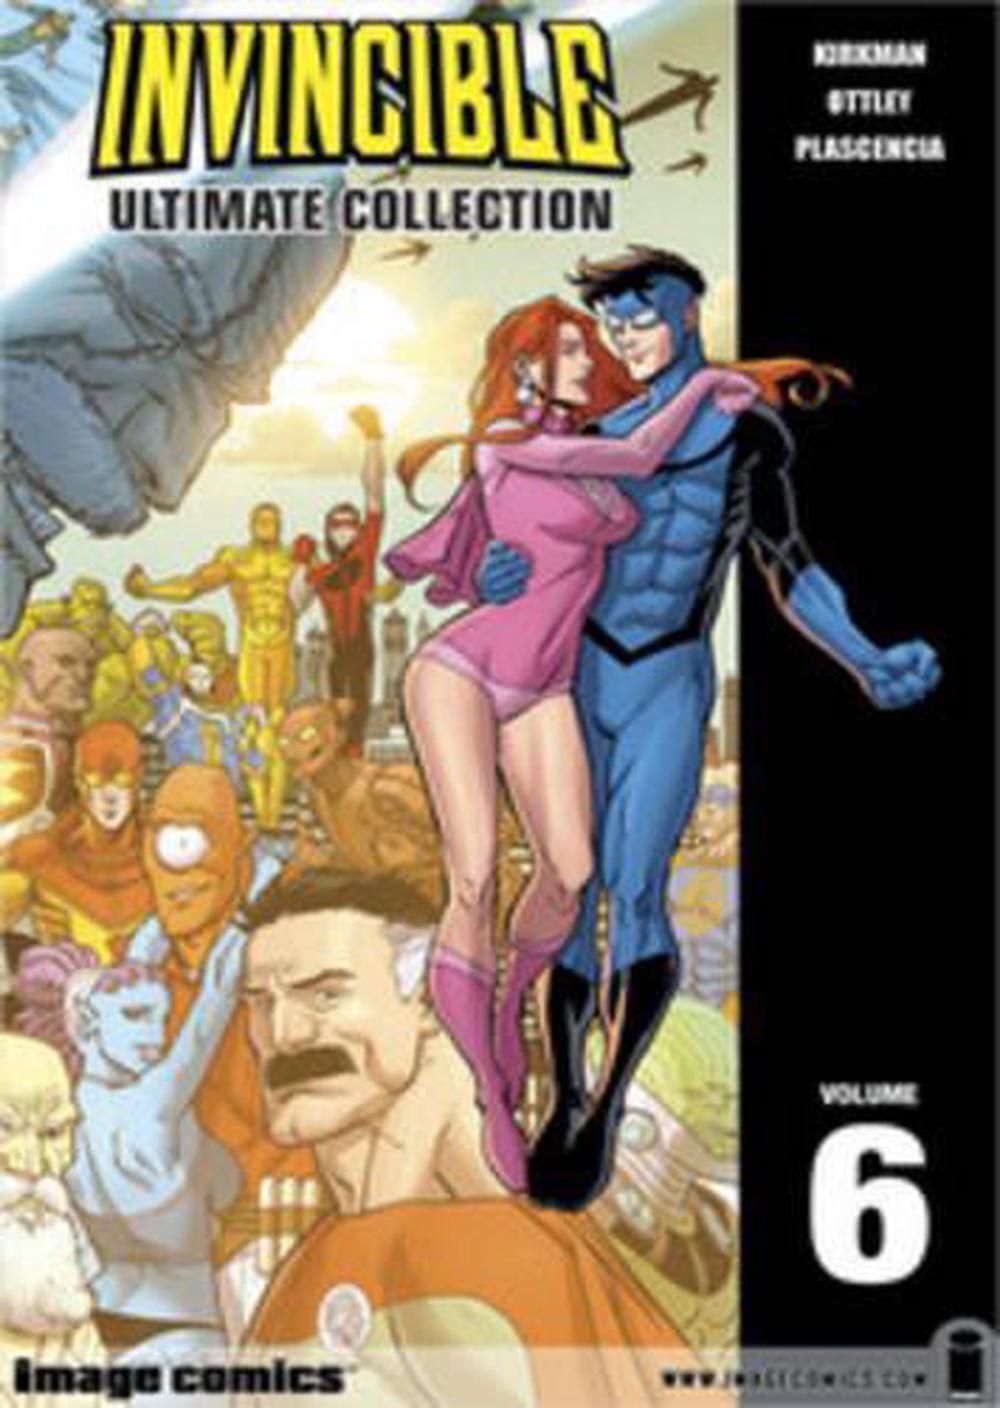 Invincible: The Ultimate Collection Volume 6 by Robert Kirkman (English) Hardcov